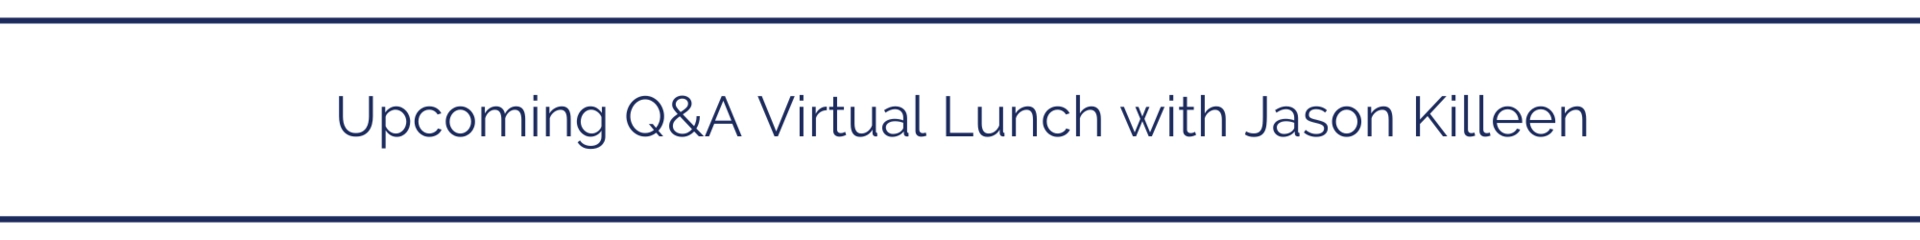 Upcoming Q&A Virtual Lunch with Jason Killeen